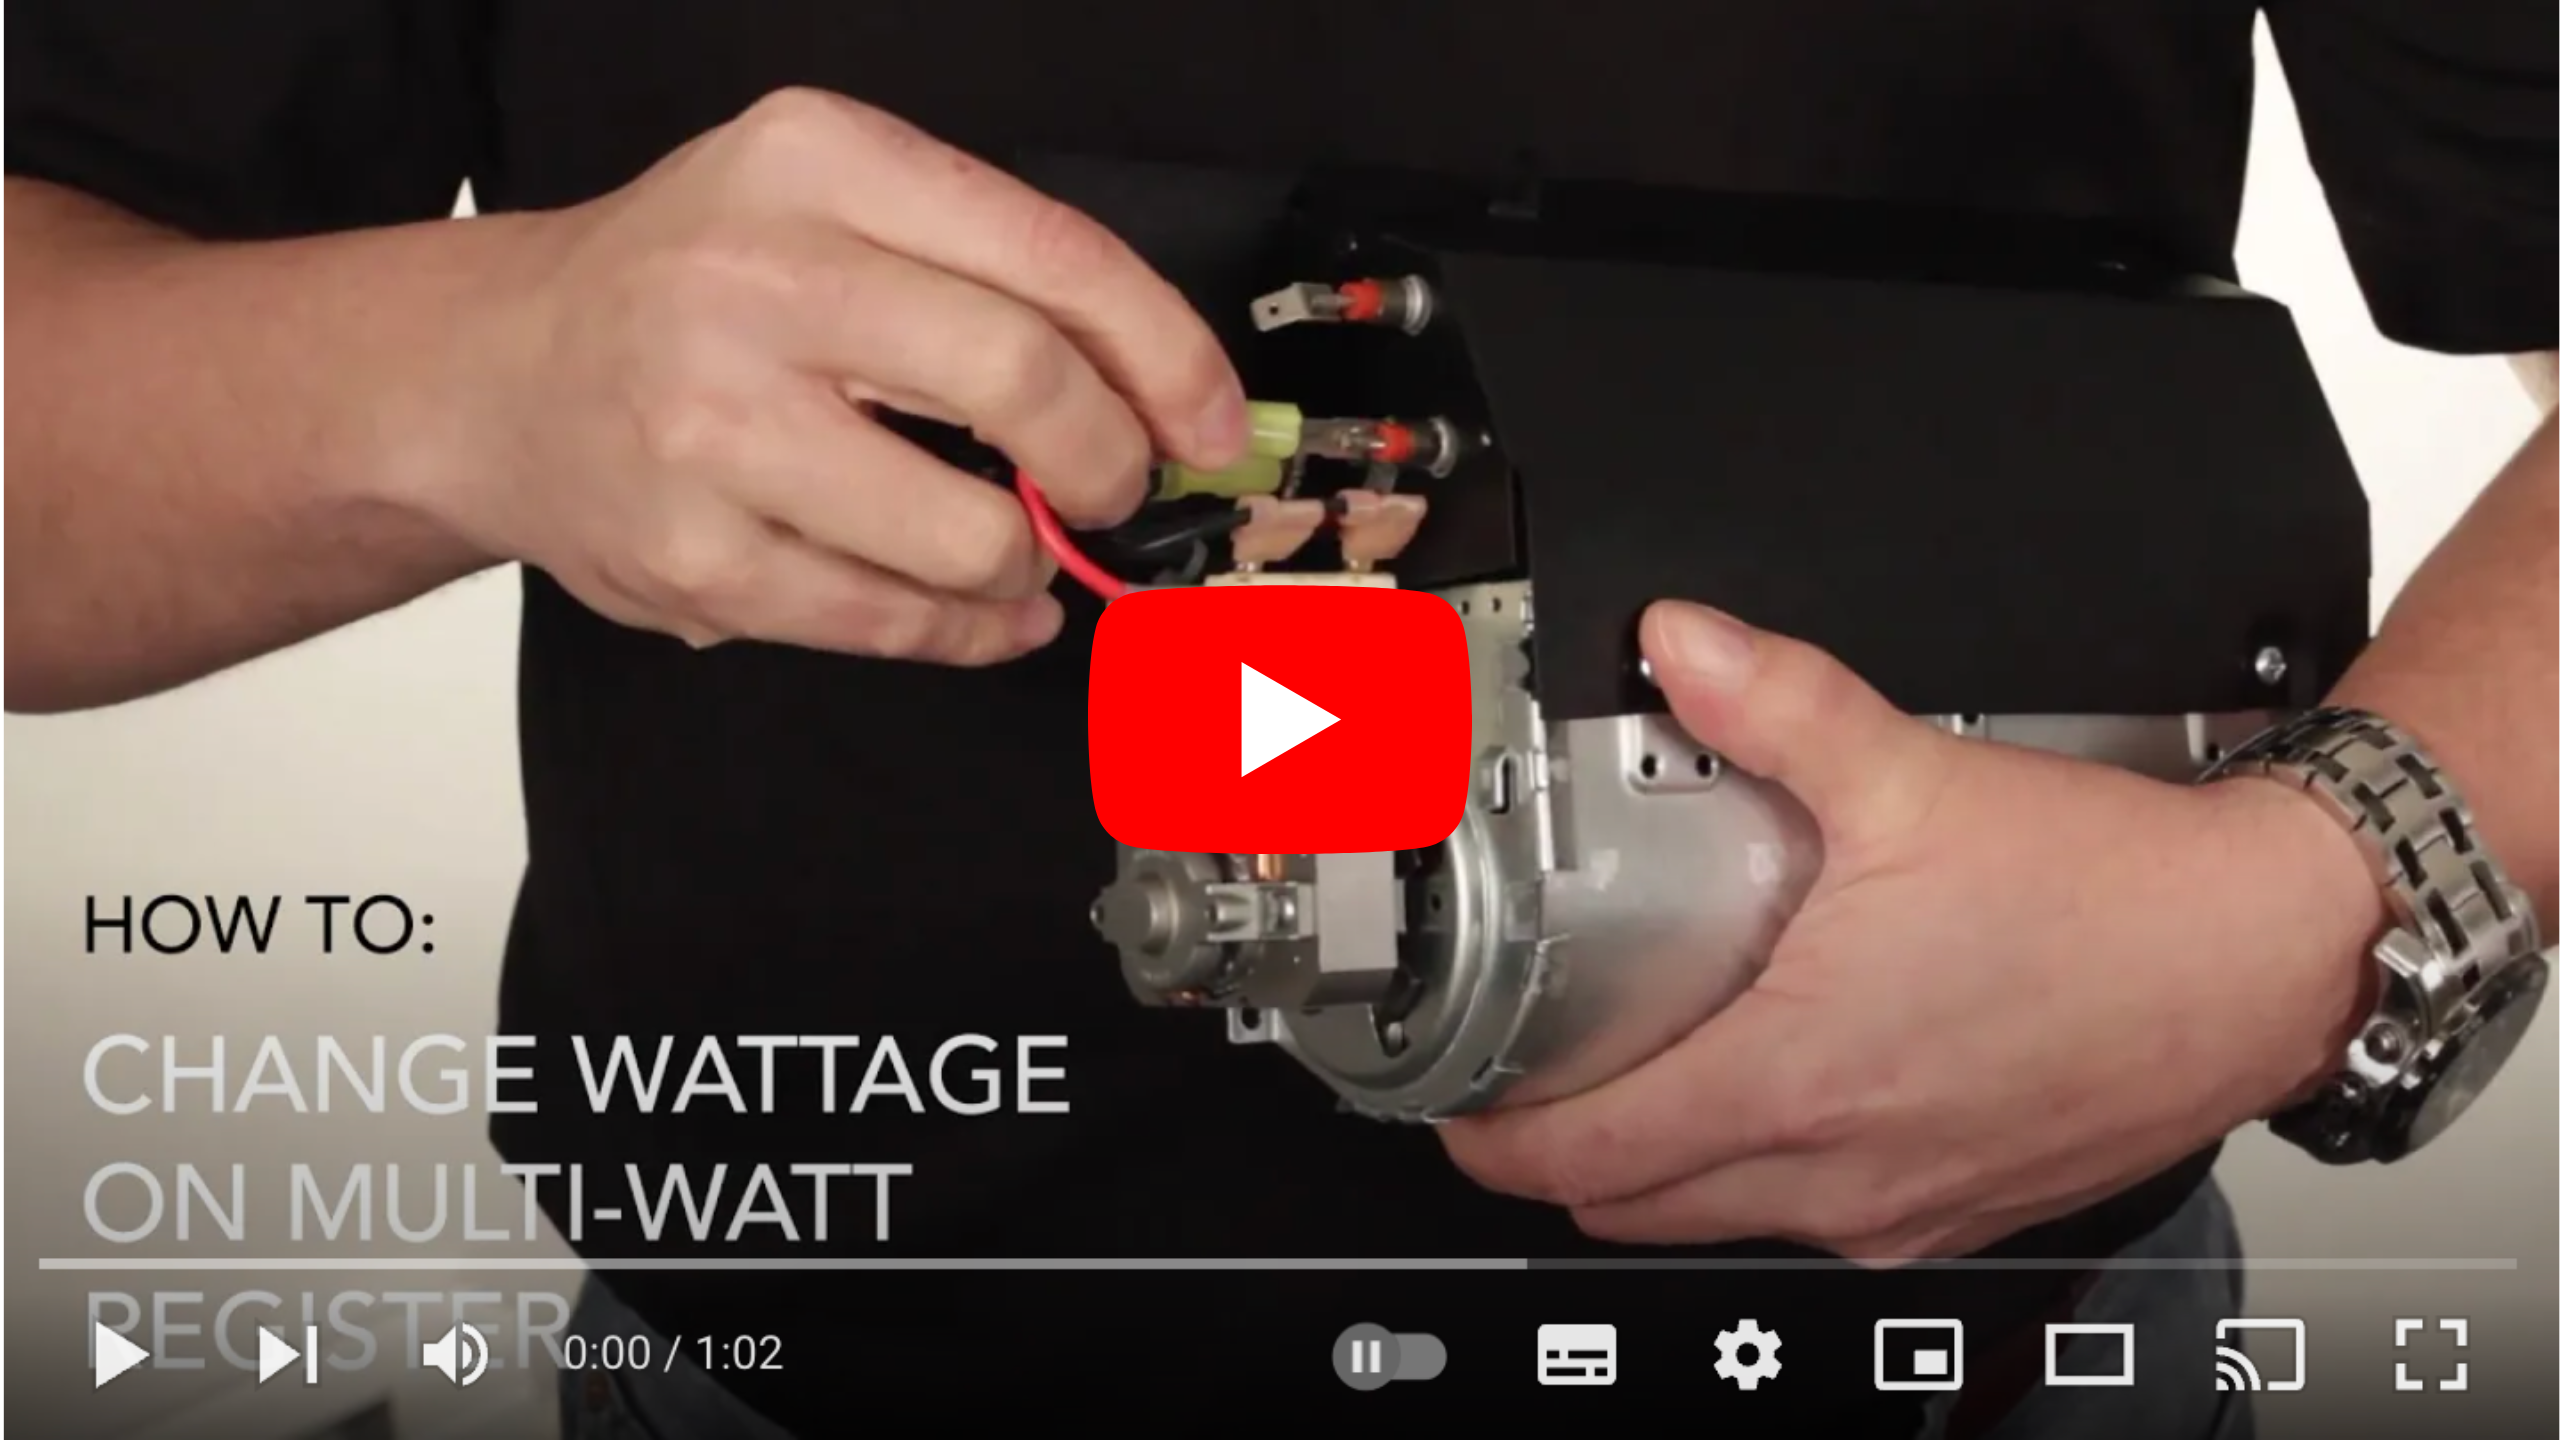 How to change the wattage on your multi-watt Register wall heater